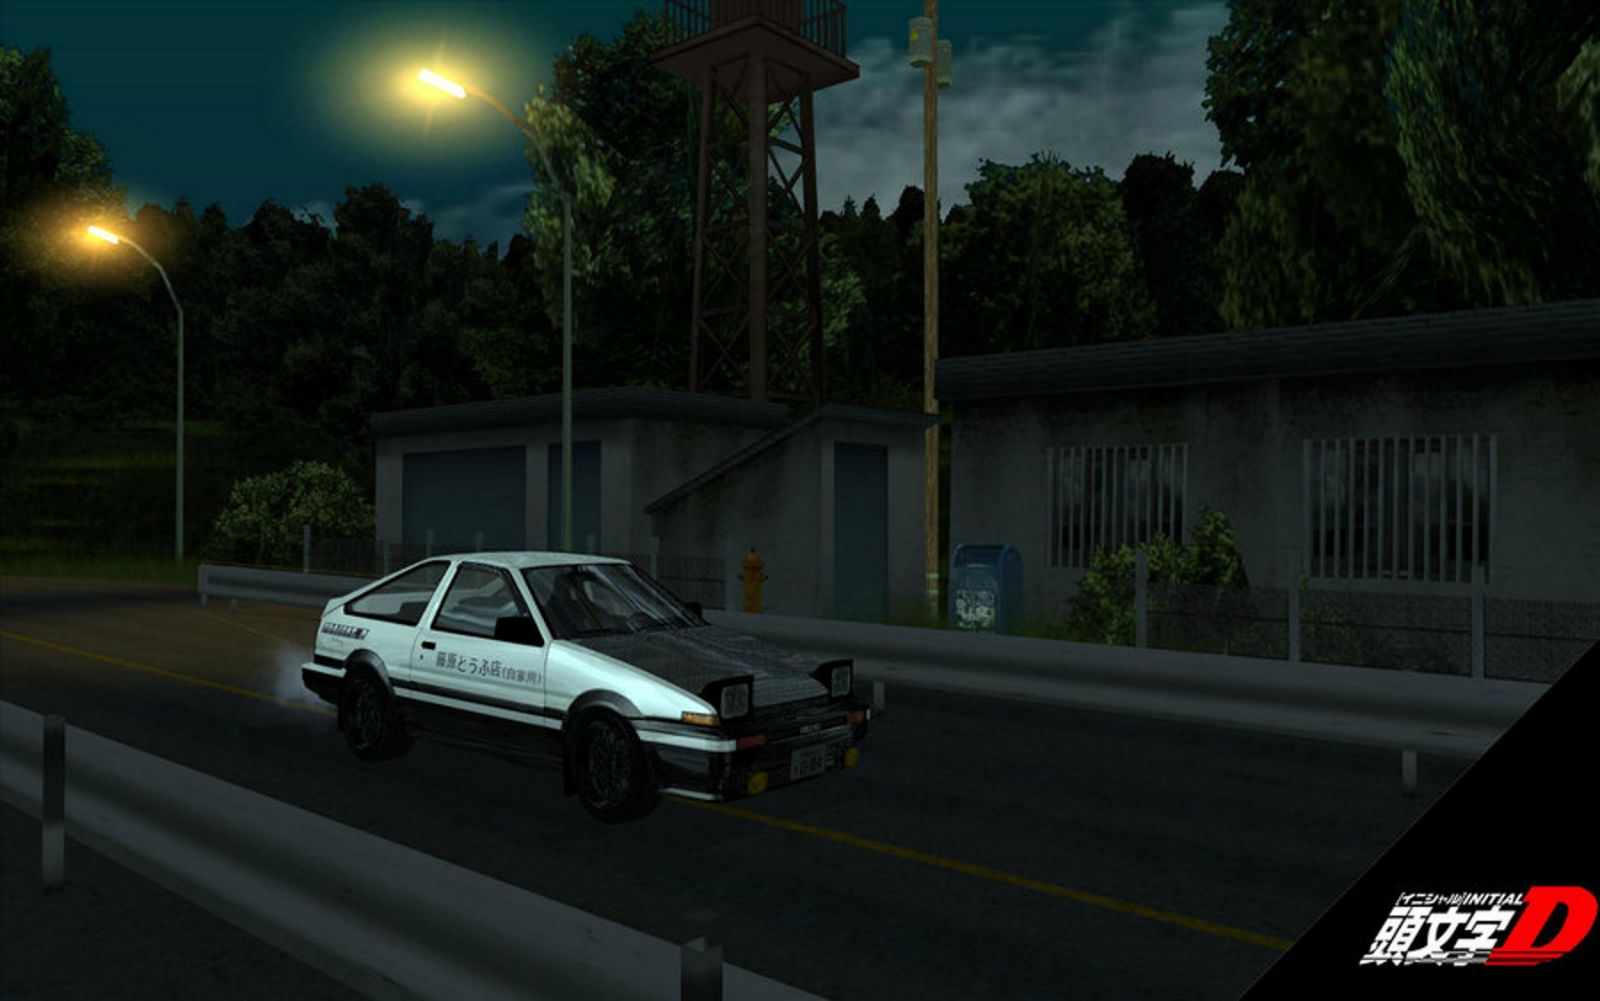 Toyota Corolla Sprinter Trueno AE86 Parked on the Side of a Workshop  Editorial Photo - Image of corolla, side: 244778706